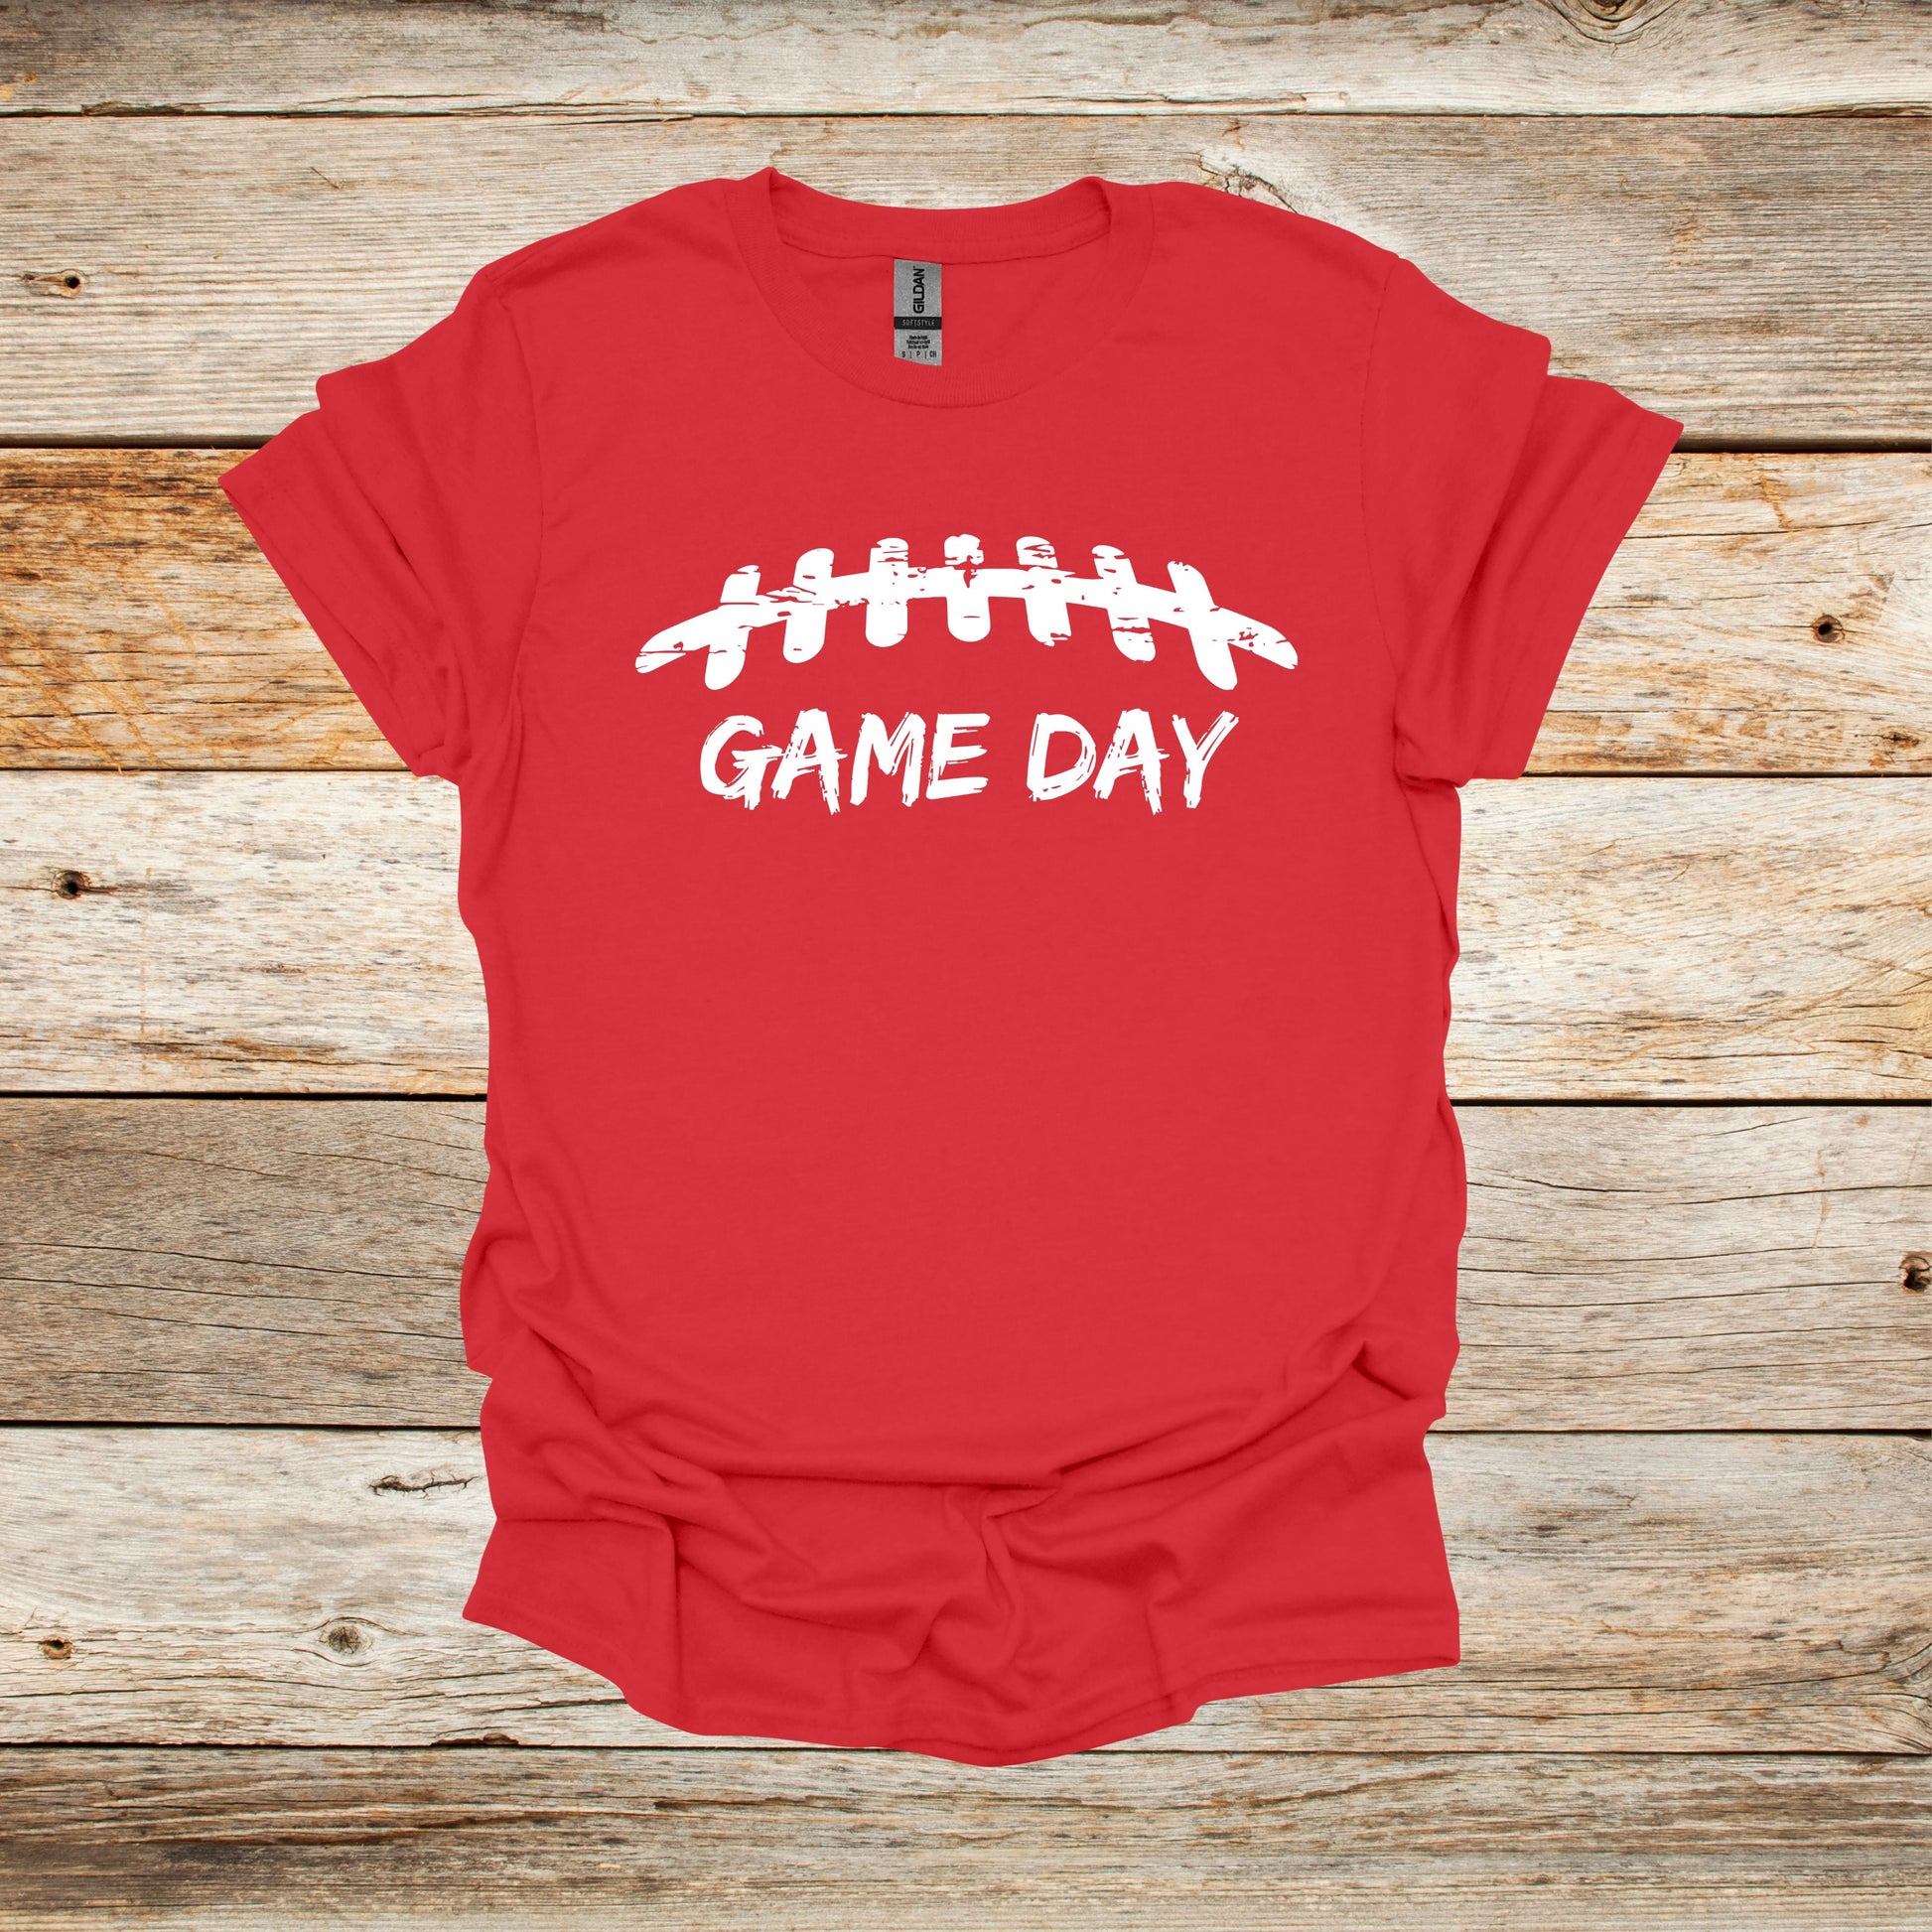 Football T-Shirt - Game Day Laces - Adult and Children's Tee Shirts - Game Day - Sports T-Shirts Graphic Avenue Red Adult Small 